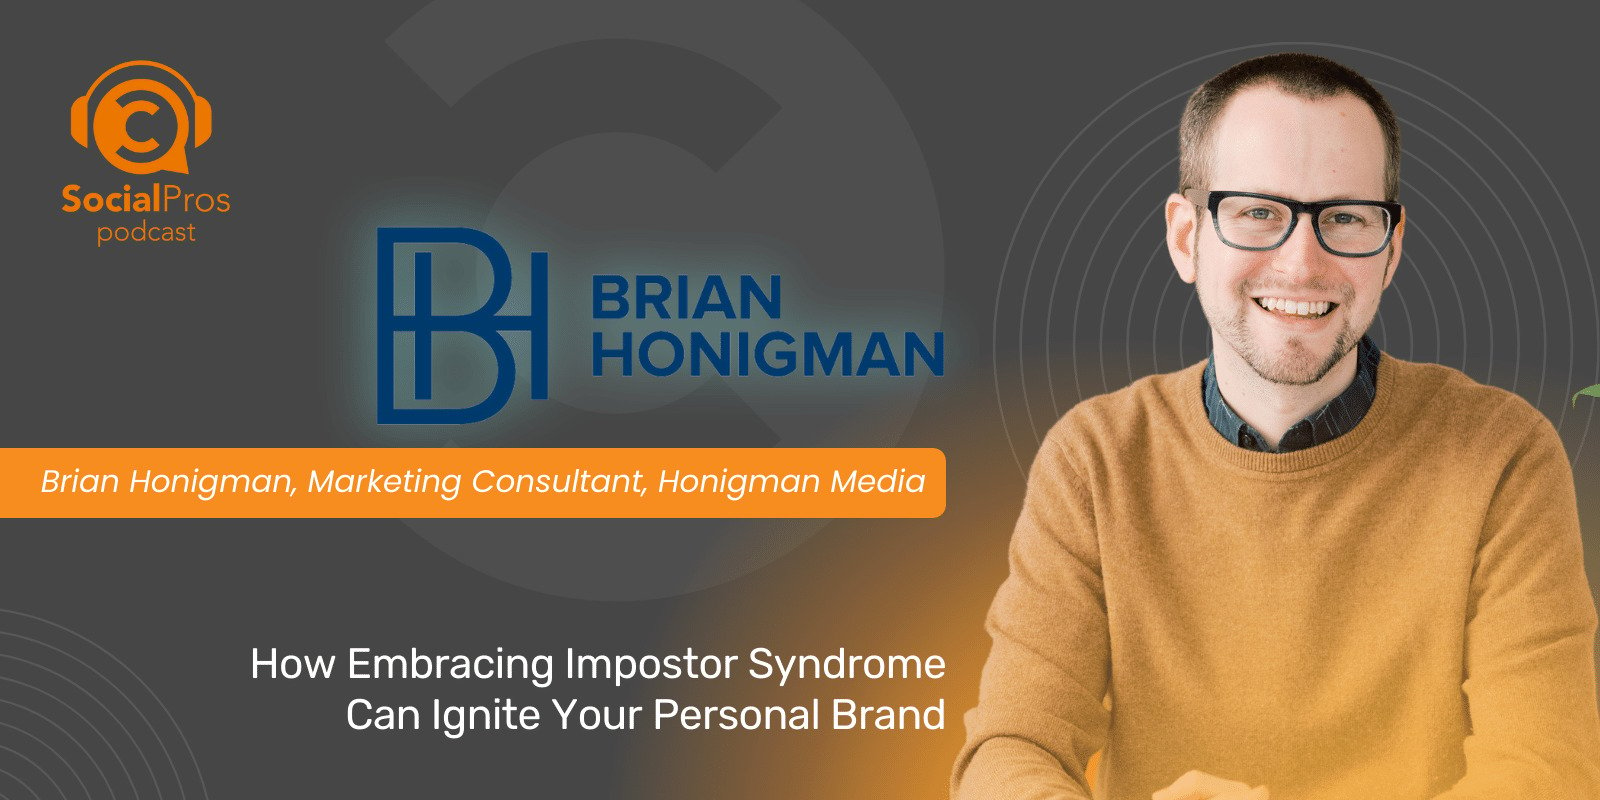 How Embracing Impostor Syndrome Can Ignite Your Personal Brand